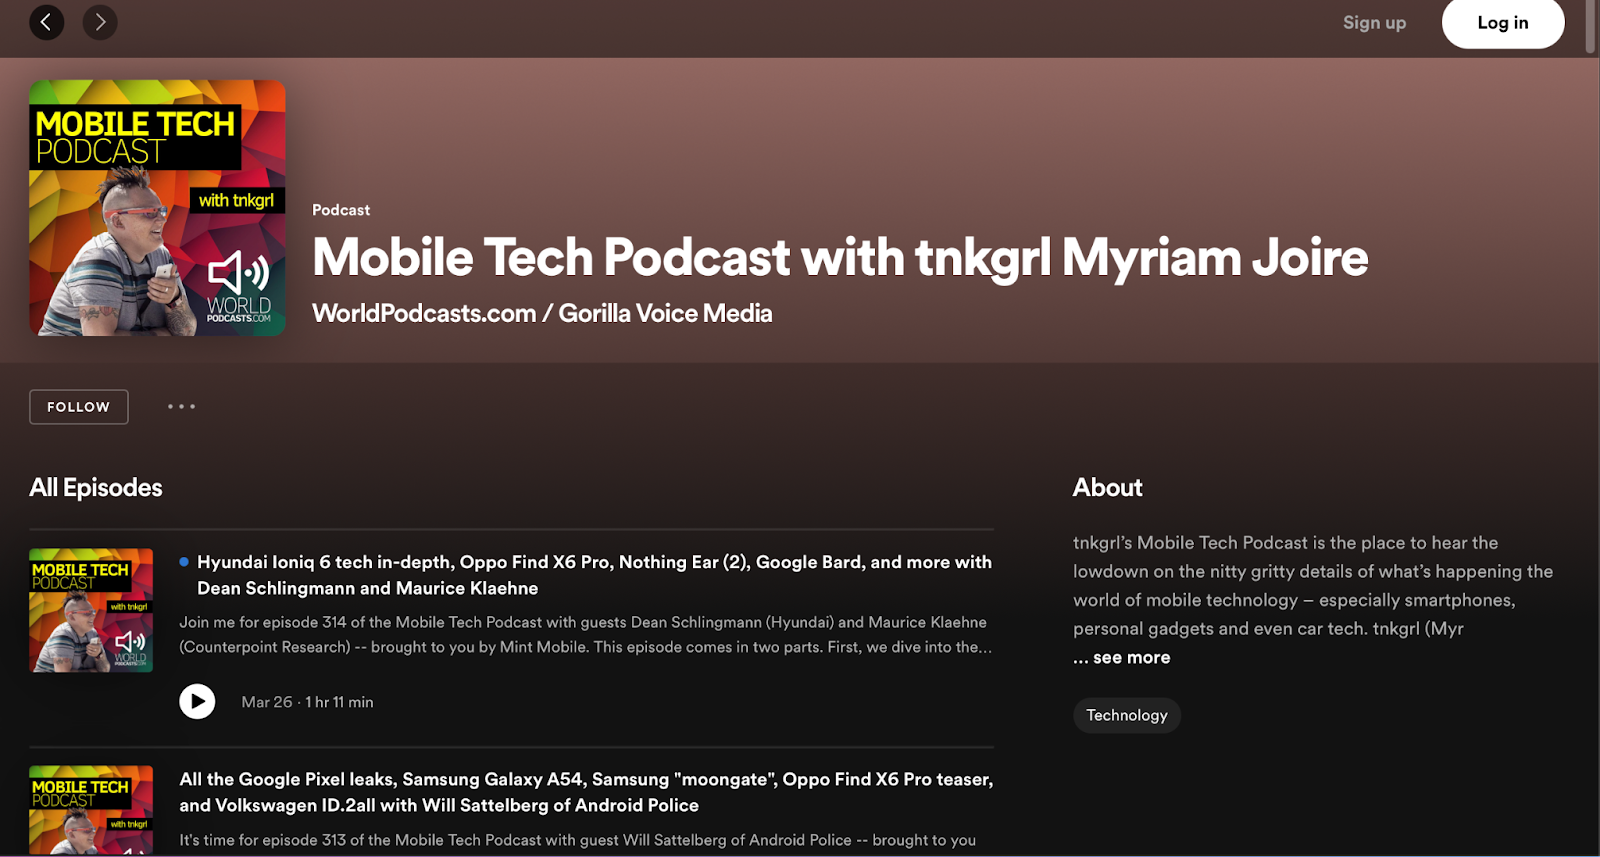 All About tnkgrl - Mobile Tech Podcast With tnkgrl Myriam Joire: A Review Of The Latest Mobile Tech Trends And Devices